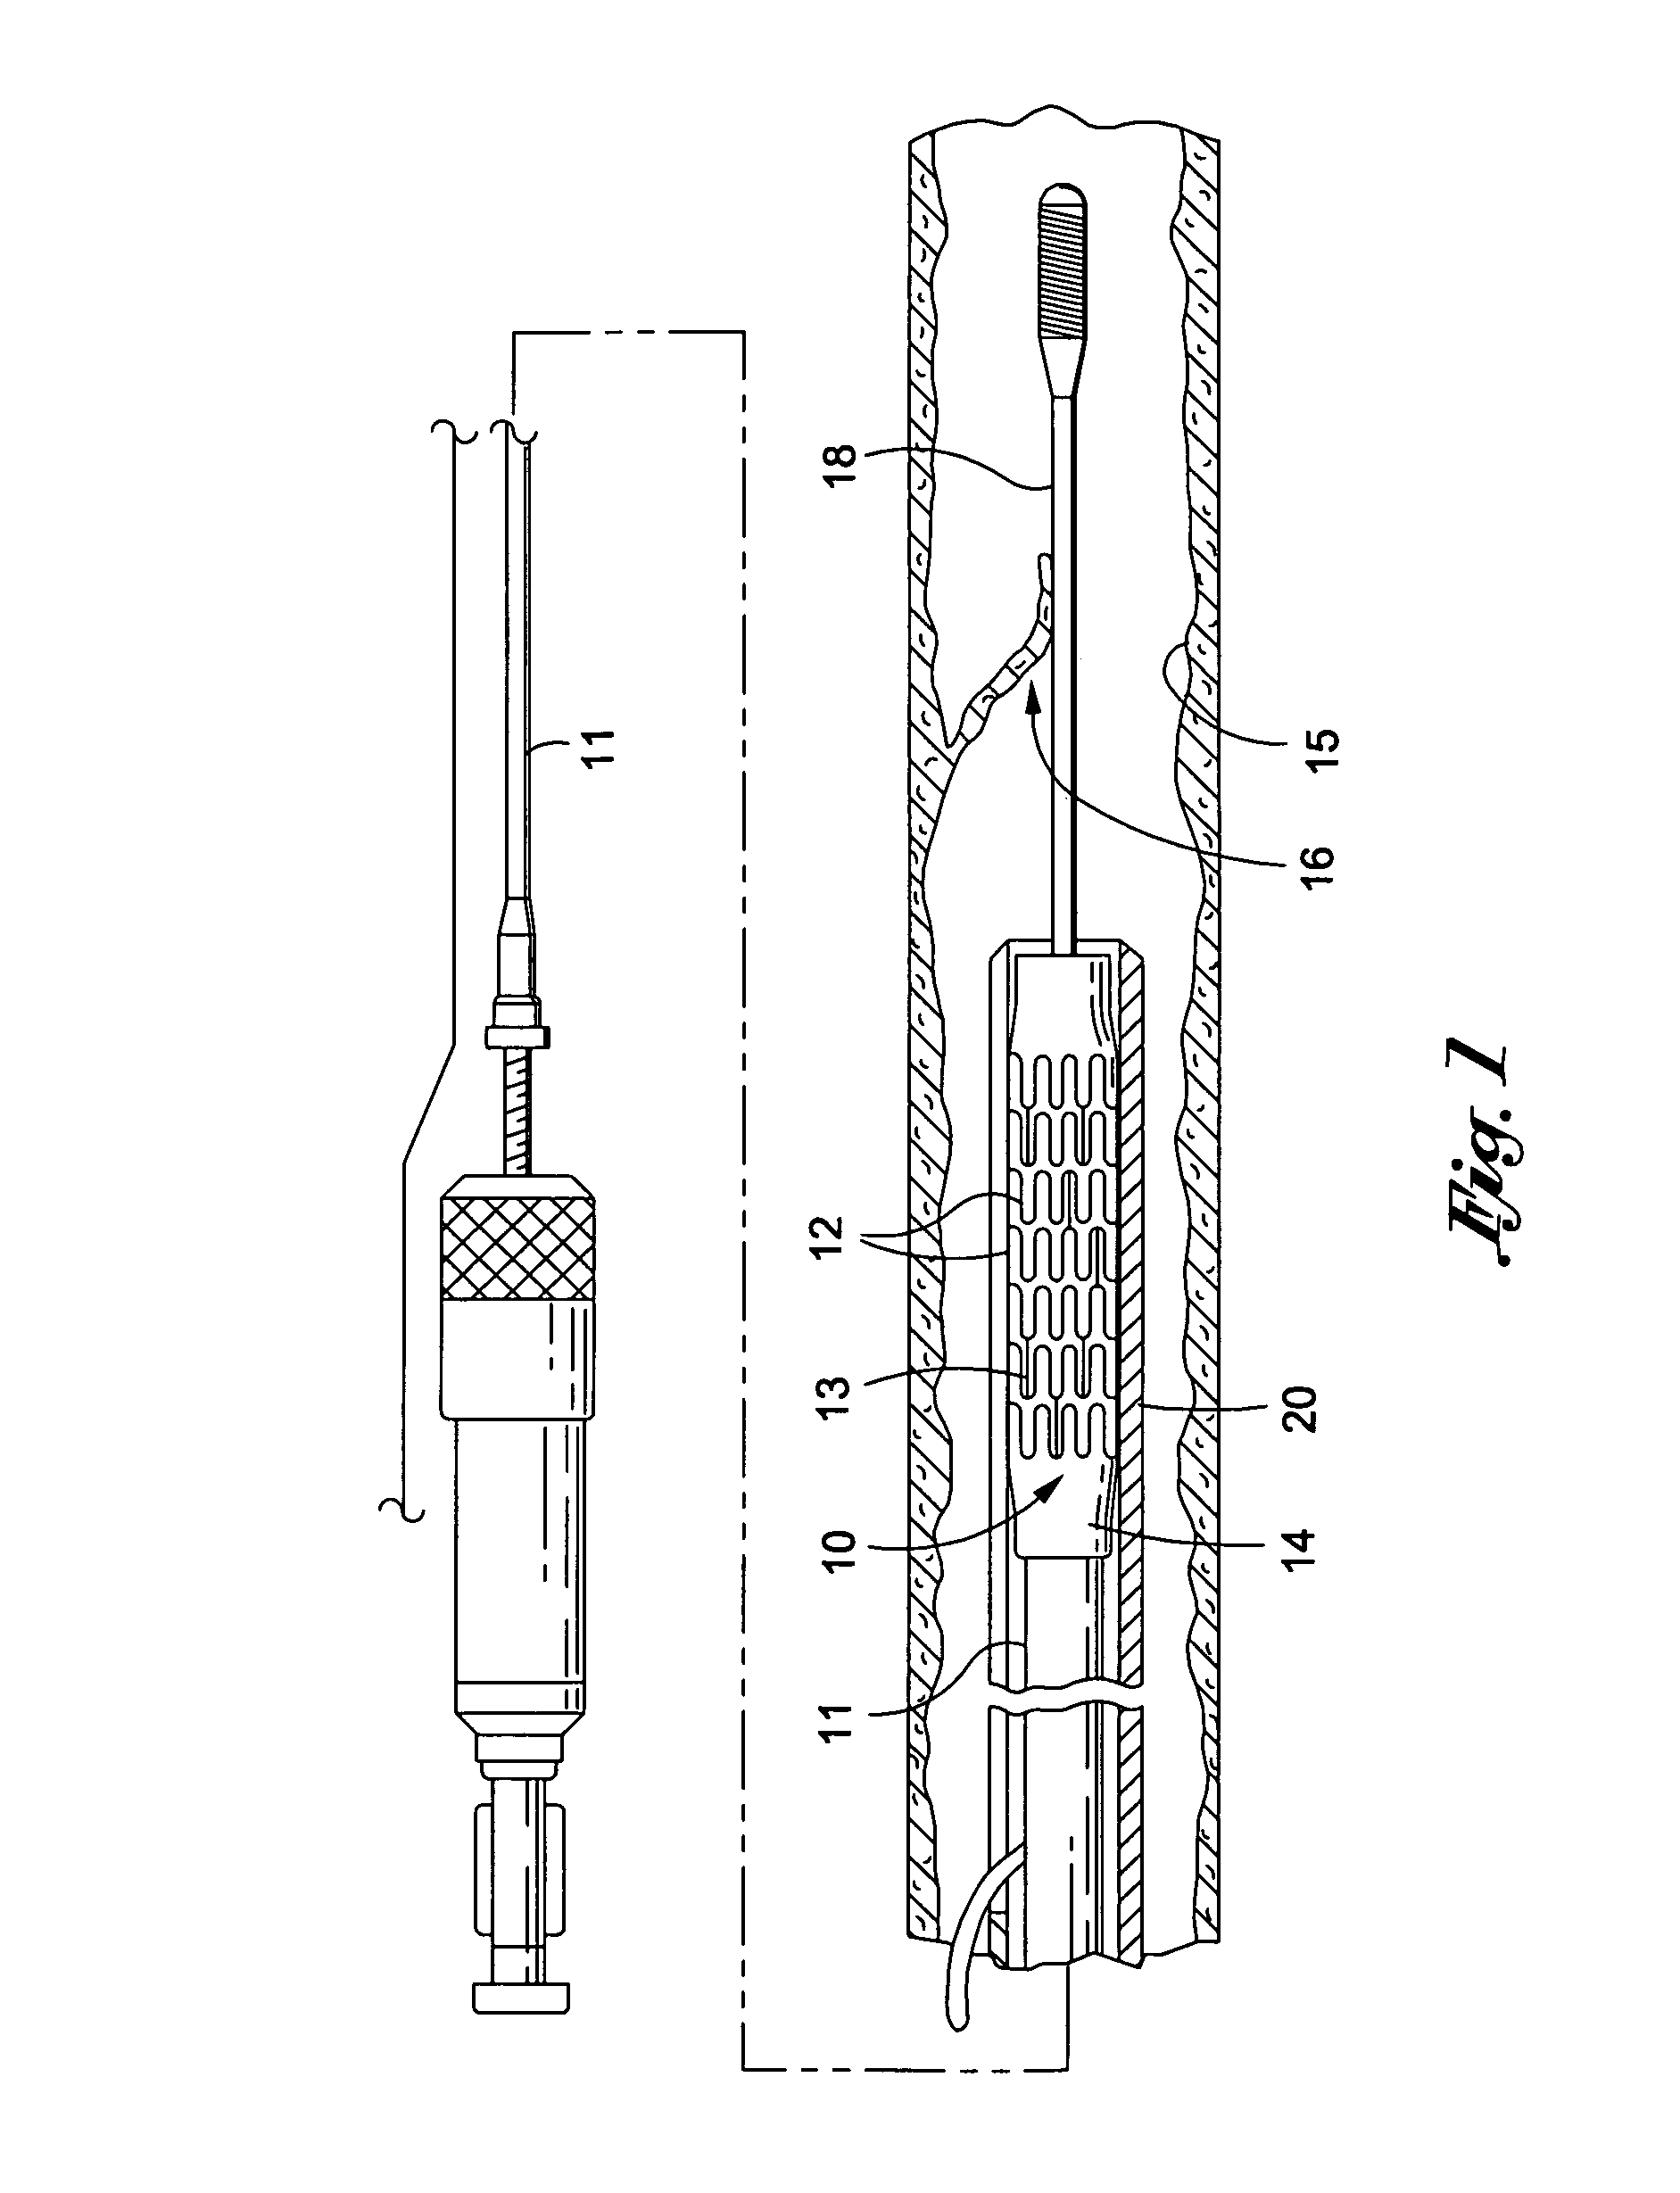 Stent crimping device